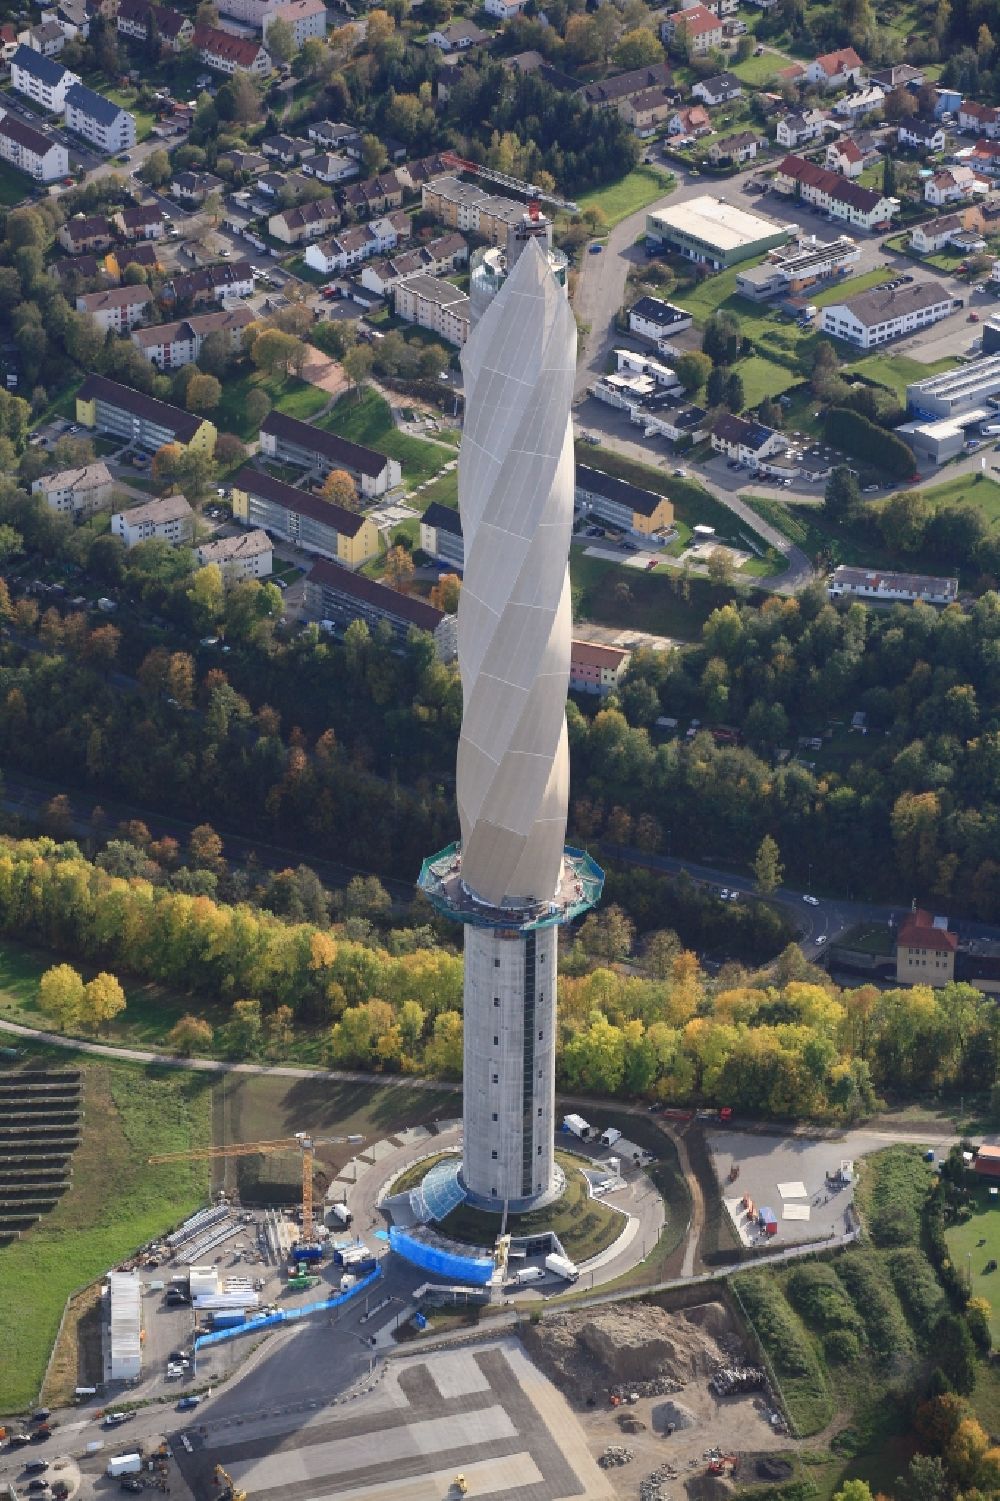 Rottweil from above - Site of the ThyssenKrupp testing tower for Speed elevators in Rottweil in Baden - Wuerttemberg. When finished the new landmark of the town of Rottweil will be the tallest structure in Baden-Wuerttemberg